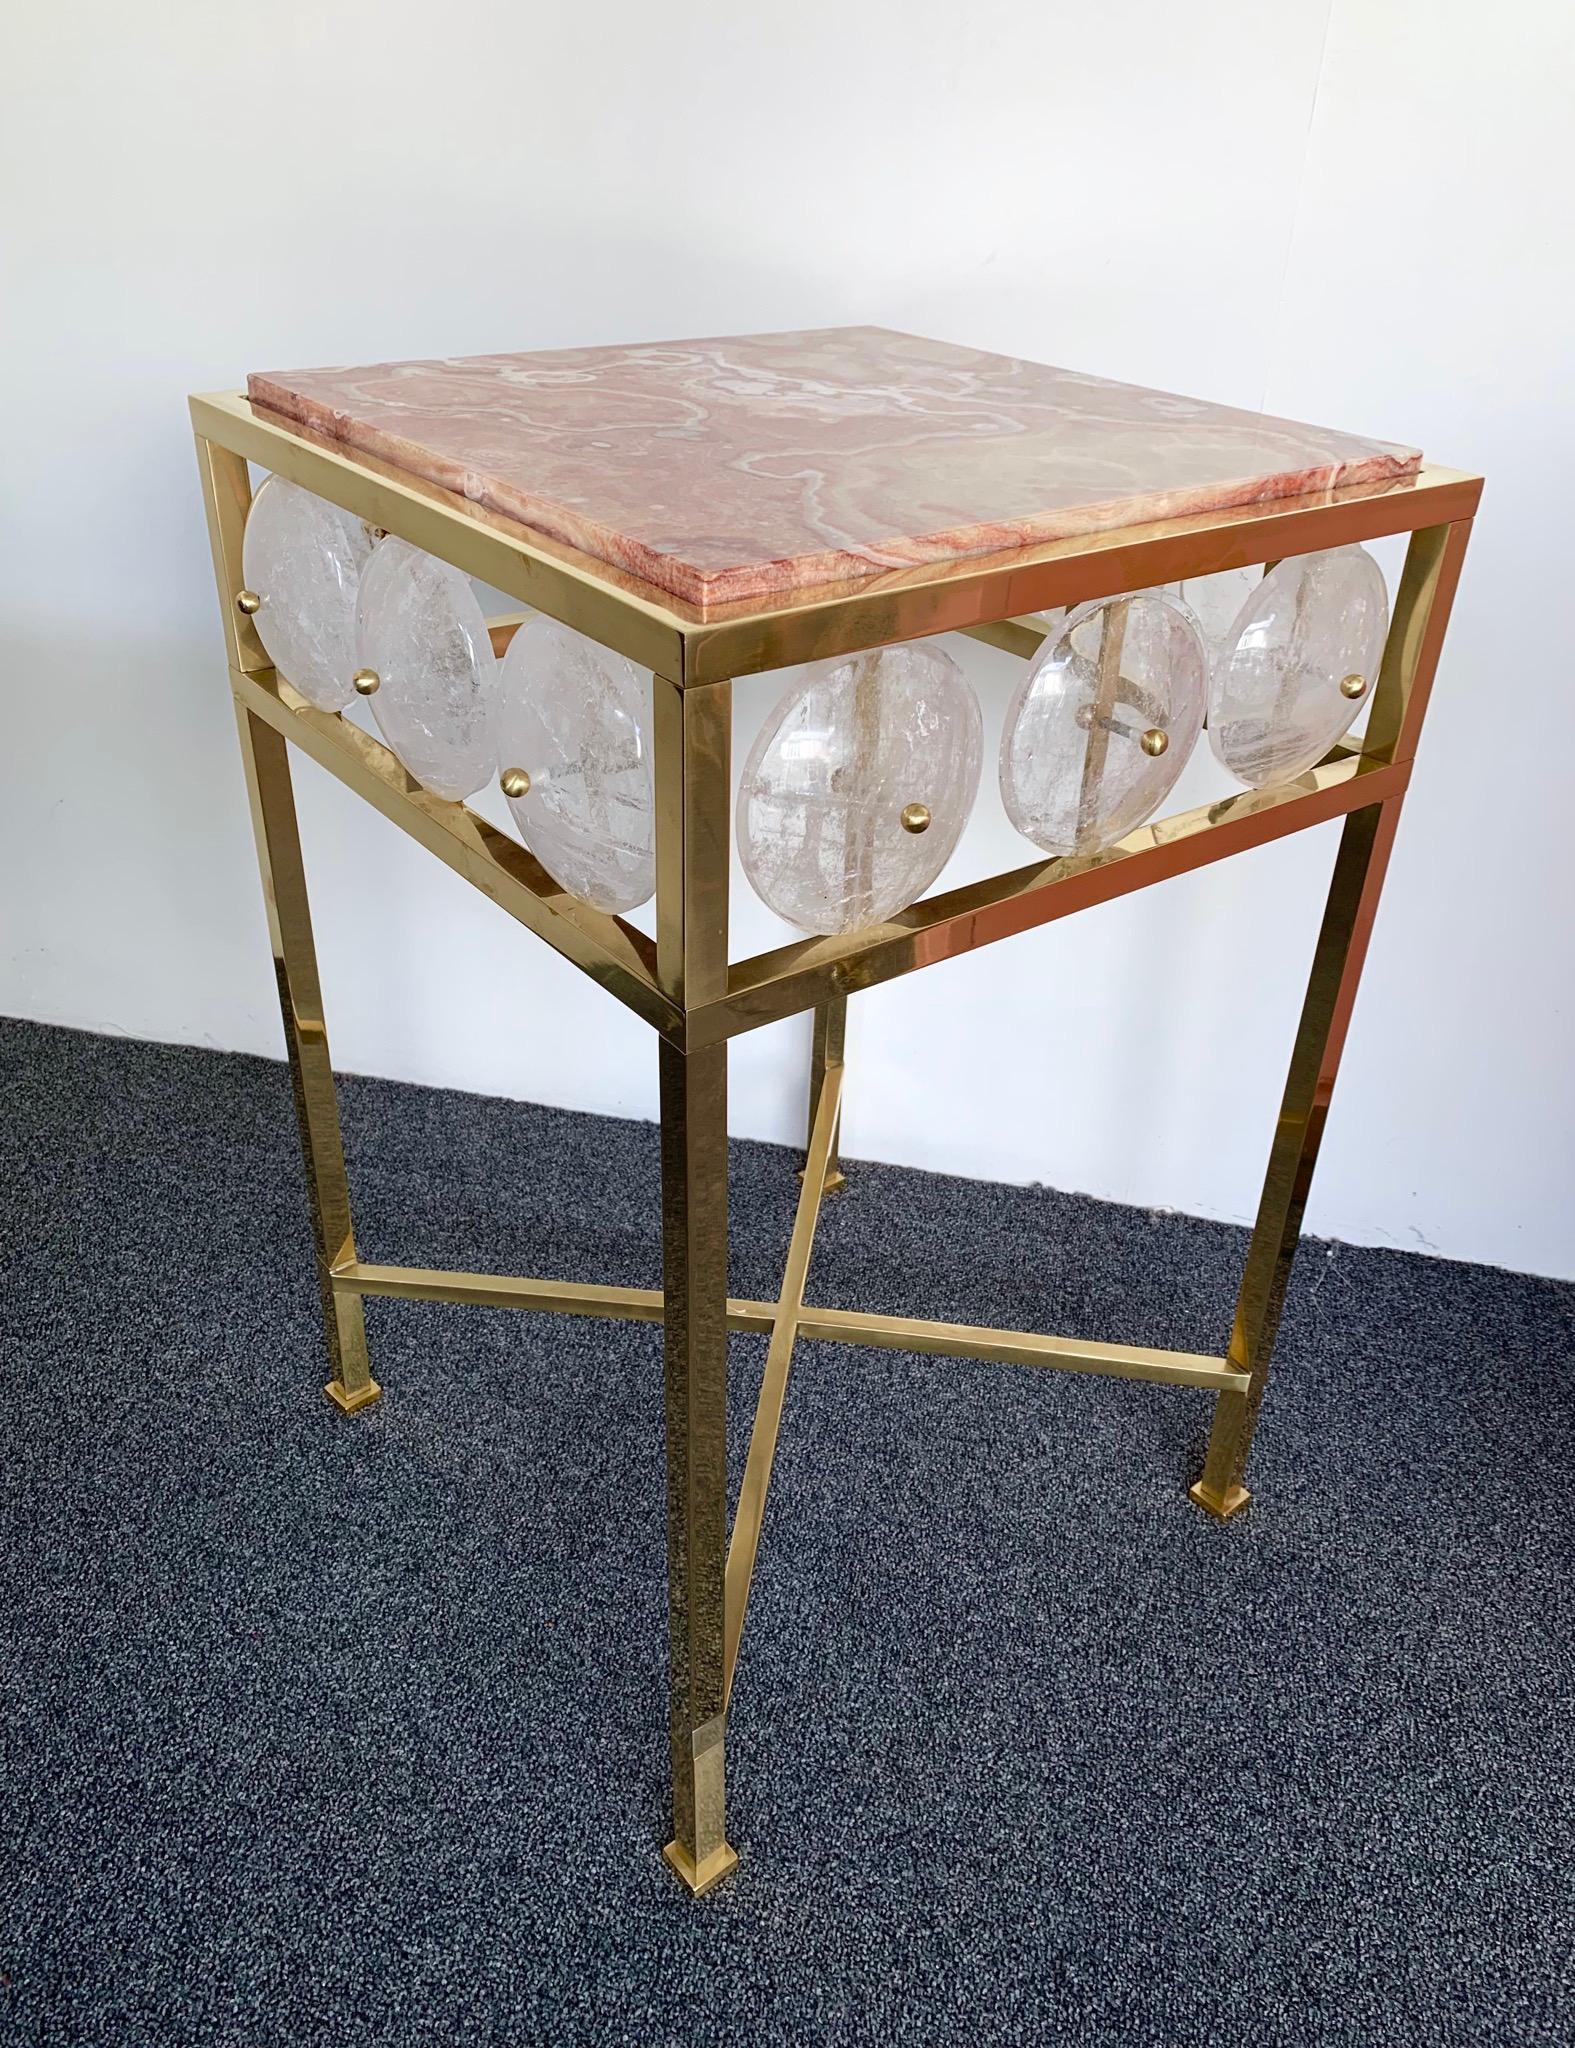 Contemporary pair of brass side end tables or night stands with large rock crystal pieces and rare red onyx top, different from marble. Neoclassical inspired style Louis XVI. Small Italian workshop, few exclusive and quality production. Also